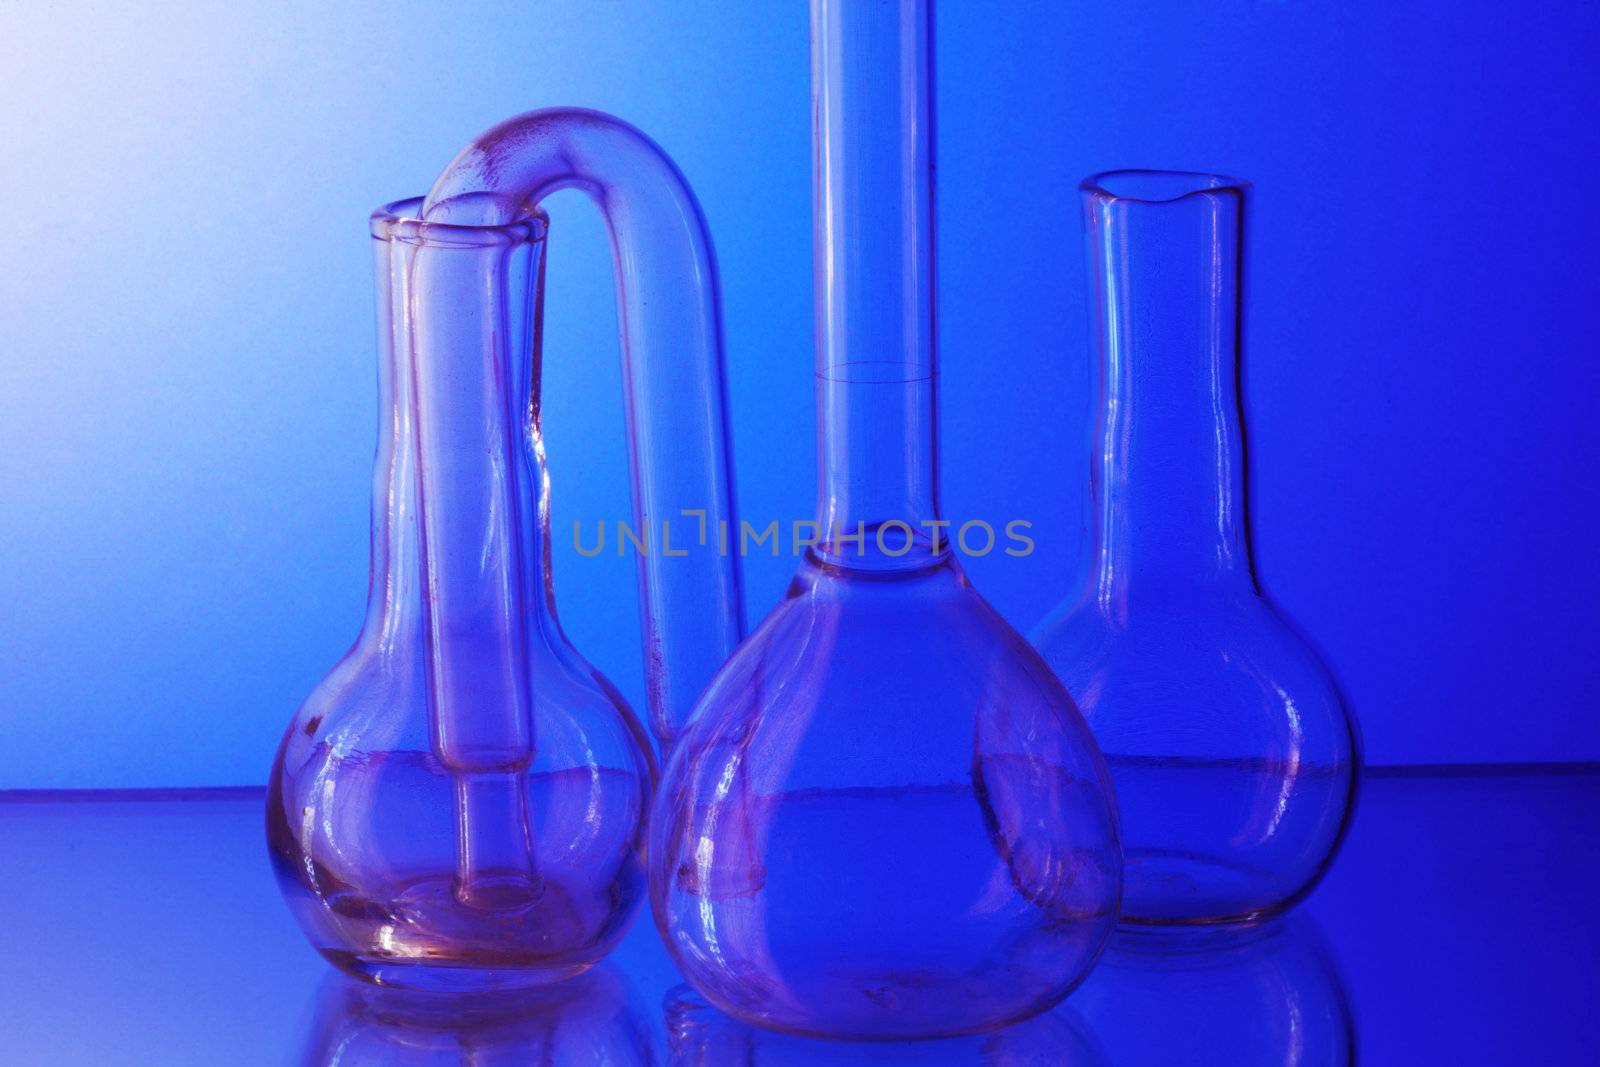 Laboratory glasswares for the analysis on a blue background